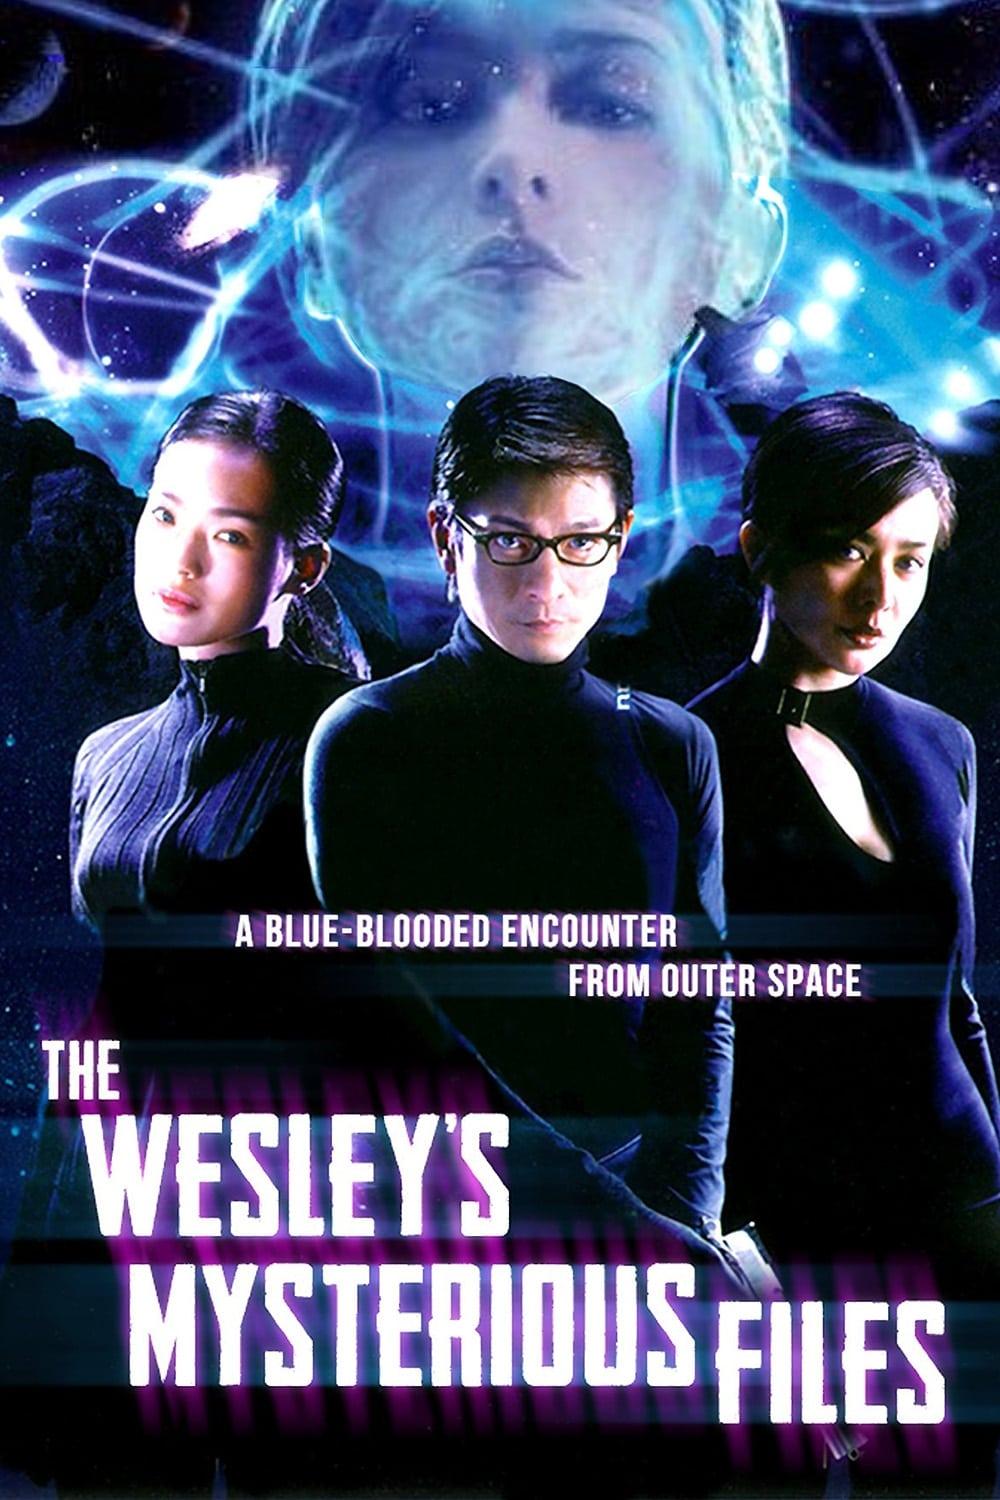 The Wesley's Mysterious File poster